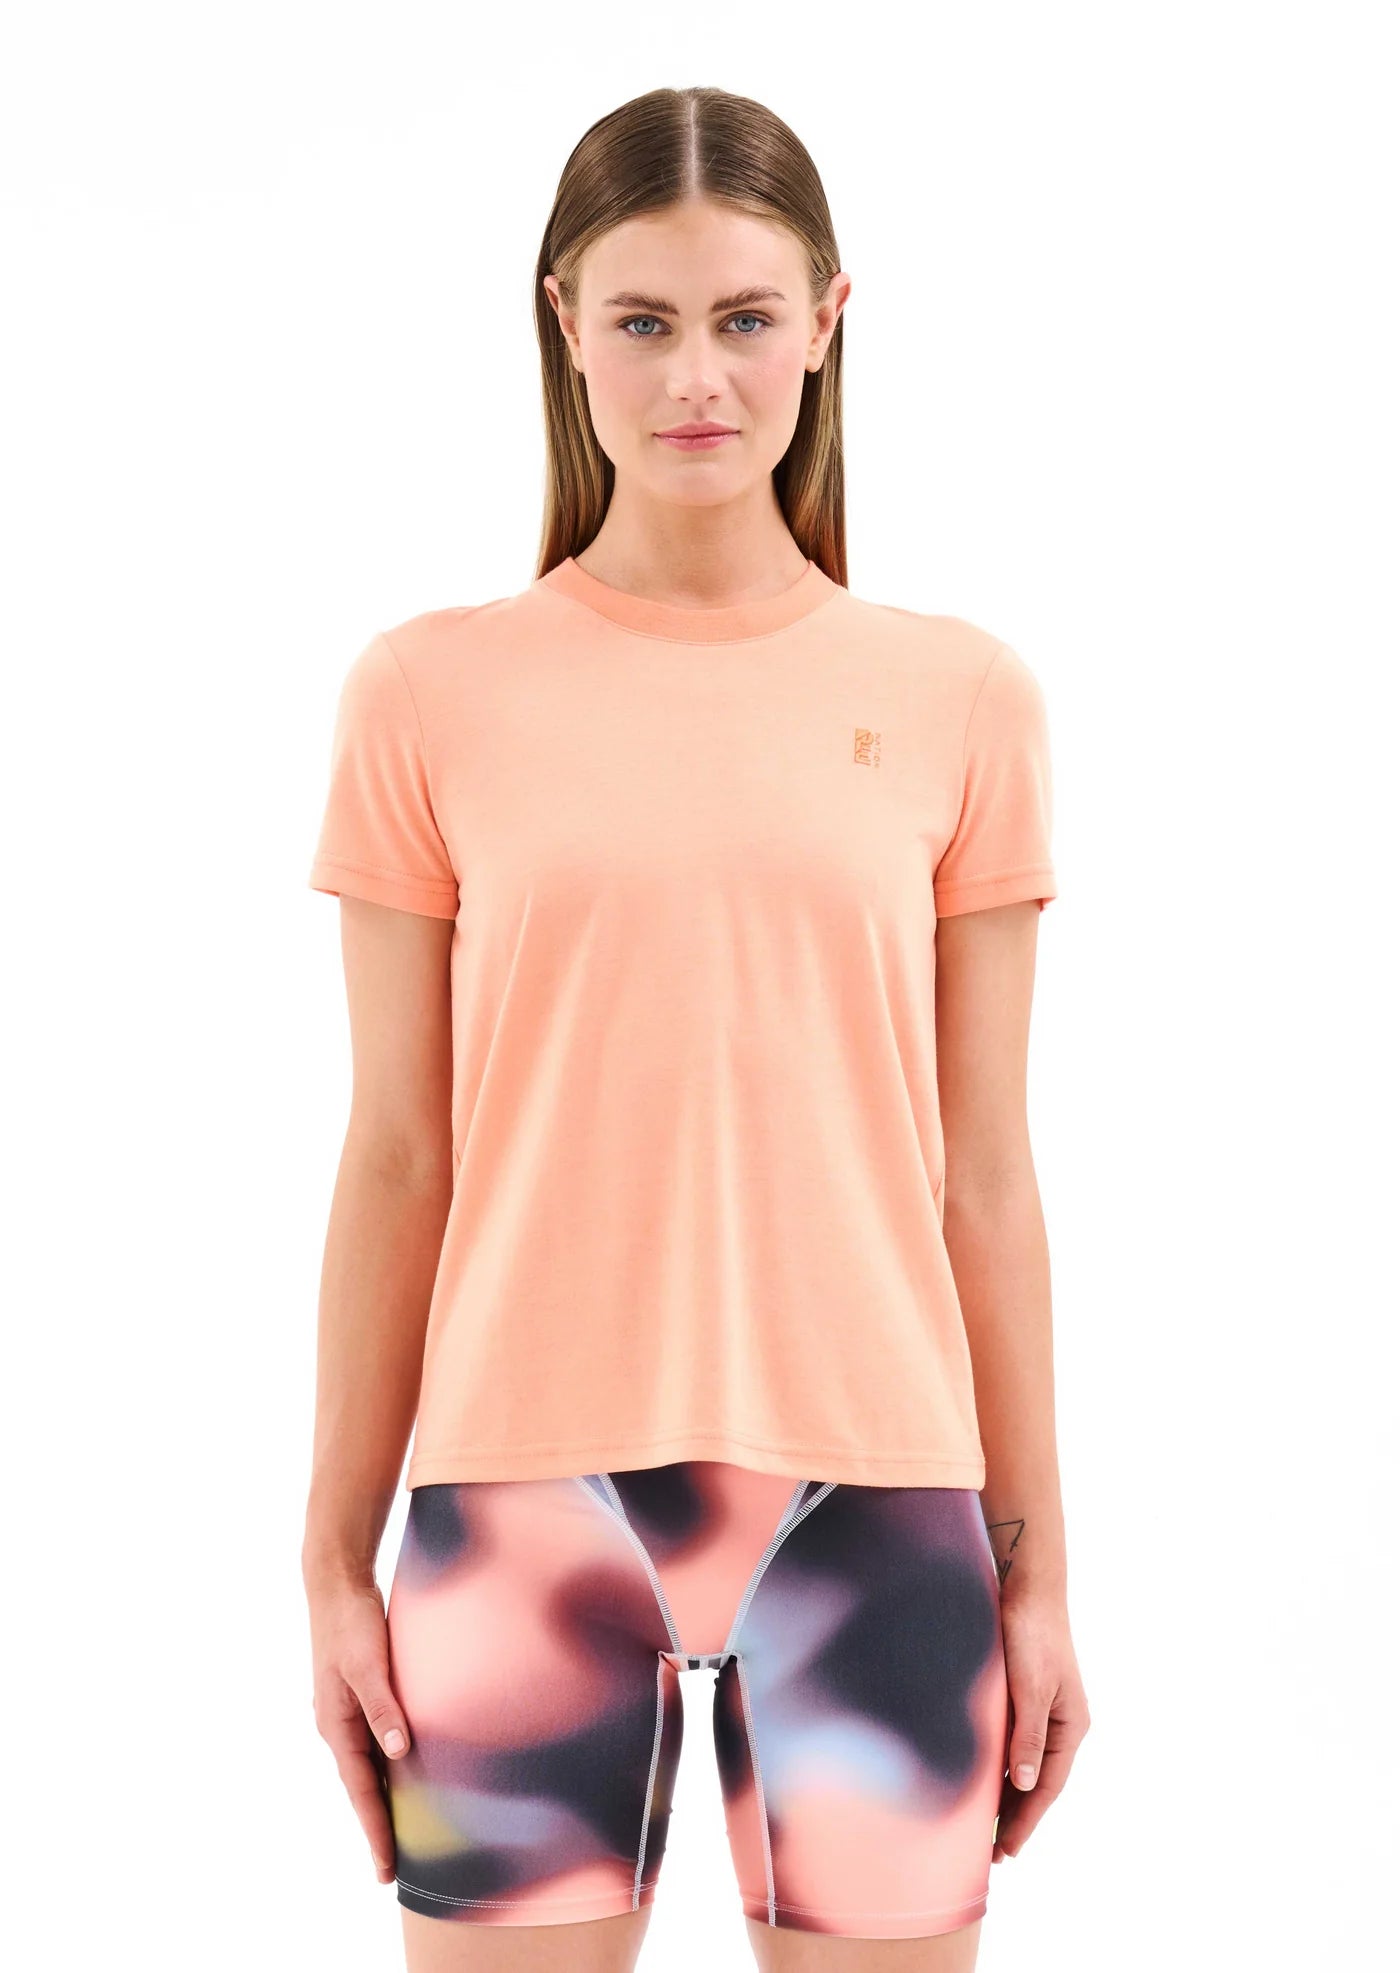 Primary Slim Fit Tee - Cantaloupe